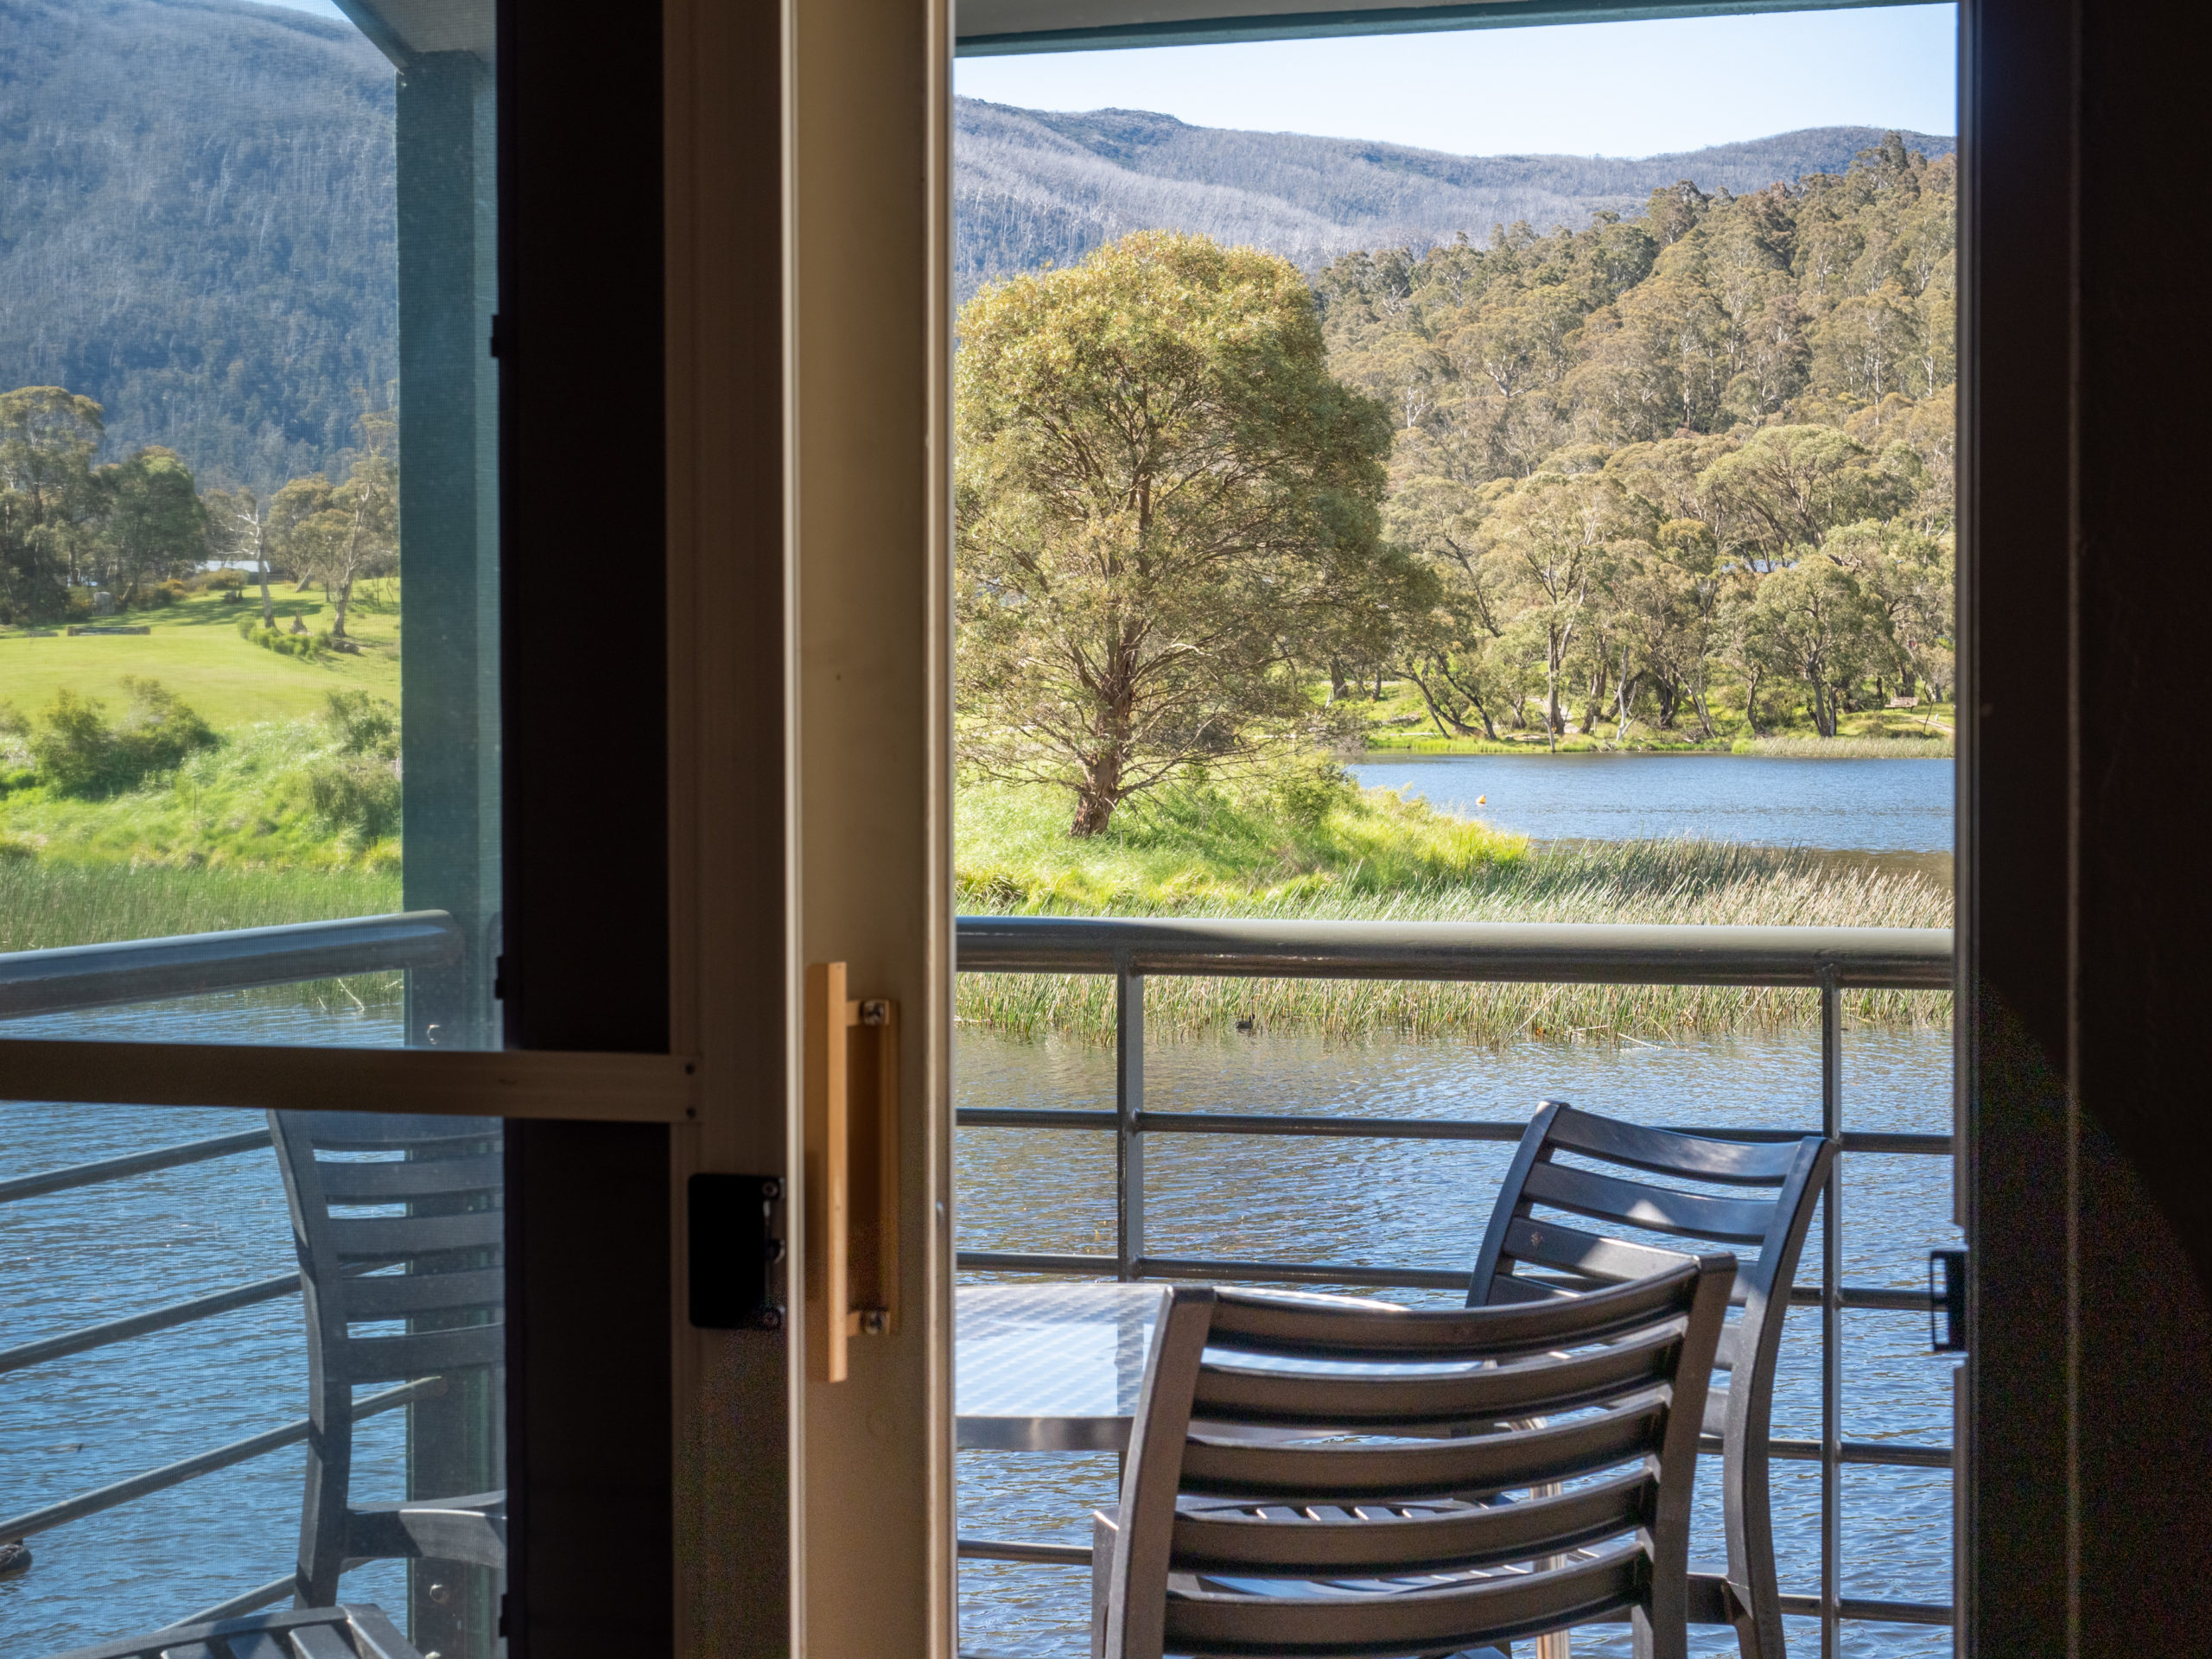 2 Storey Lake Side 3 Bedroom Apartment at Lake Crackenback – Offers Over $1,000,000